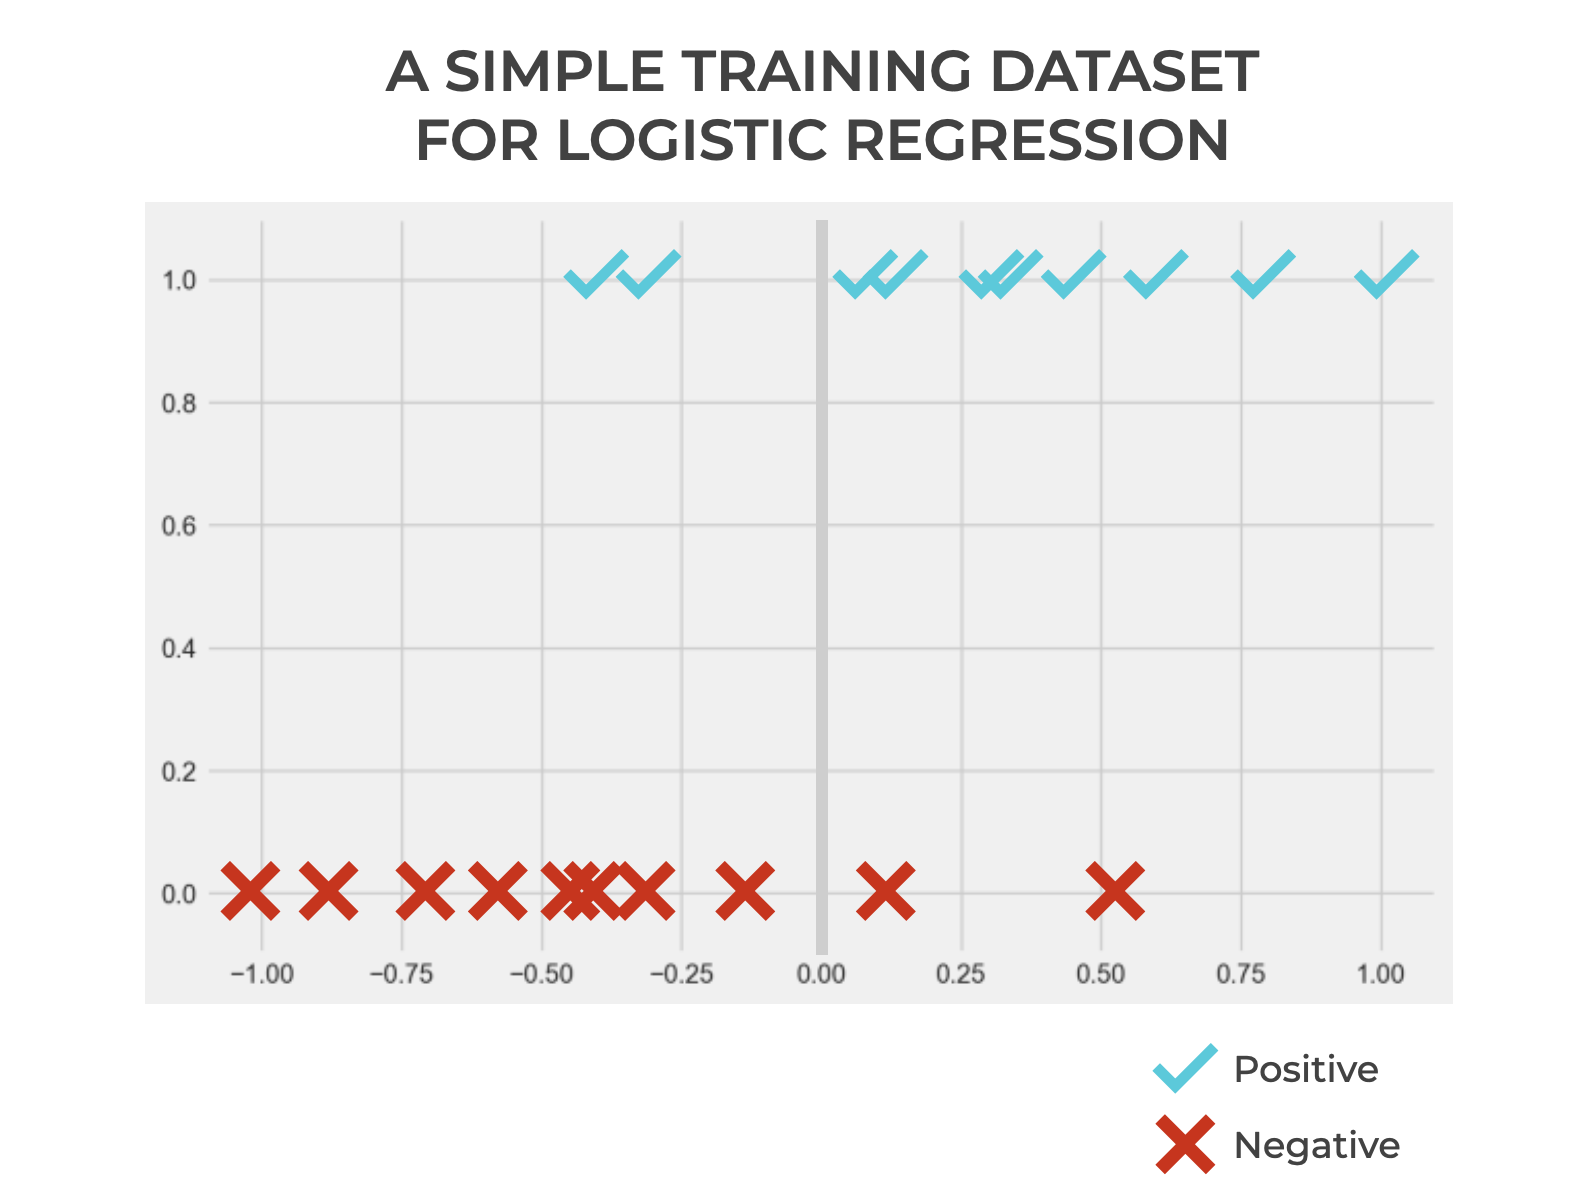 An image that shows hypothetical training data for a logistic regression model.